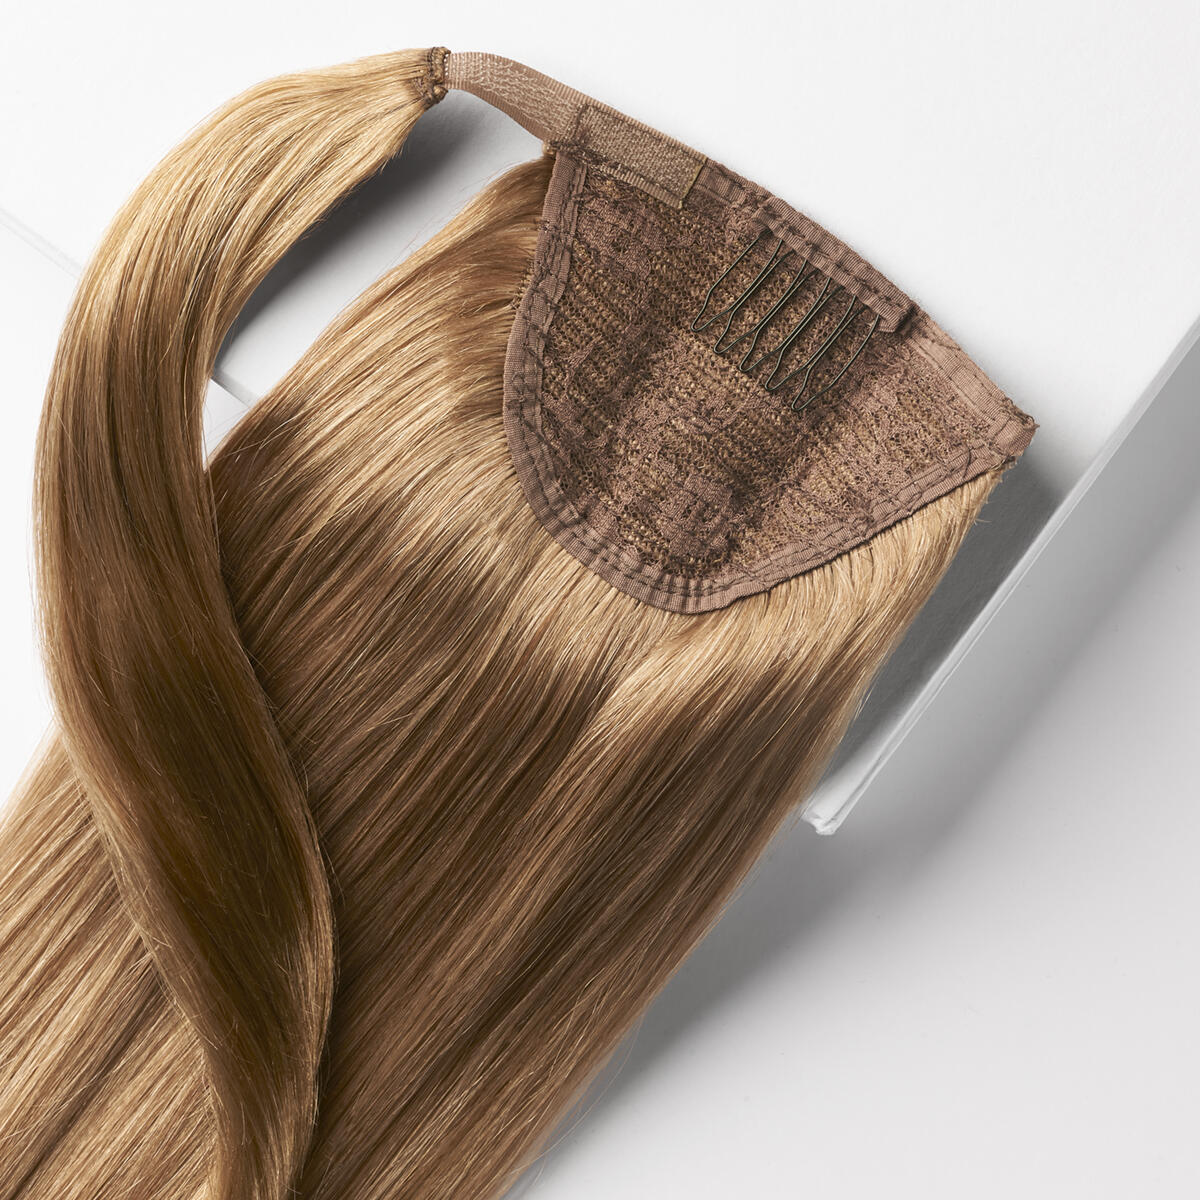 Clip-in Ponytail Ponytail made of real hair 7.3 Cendre Ash 30 cm